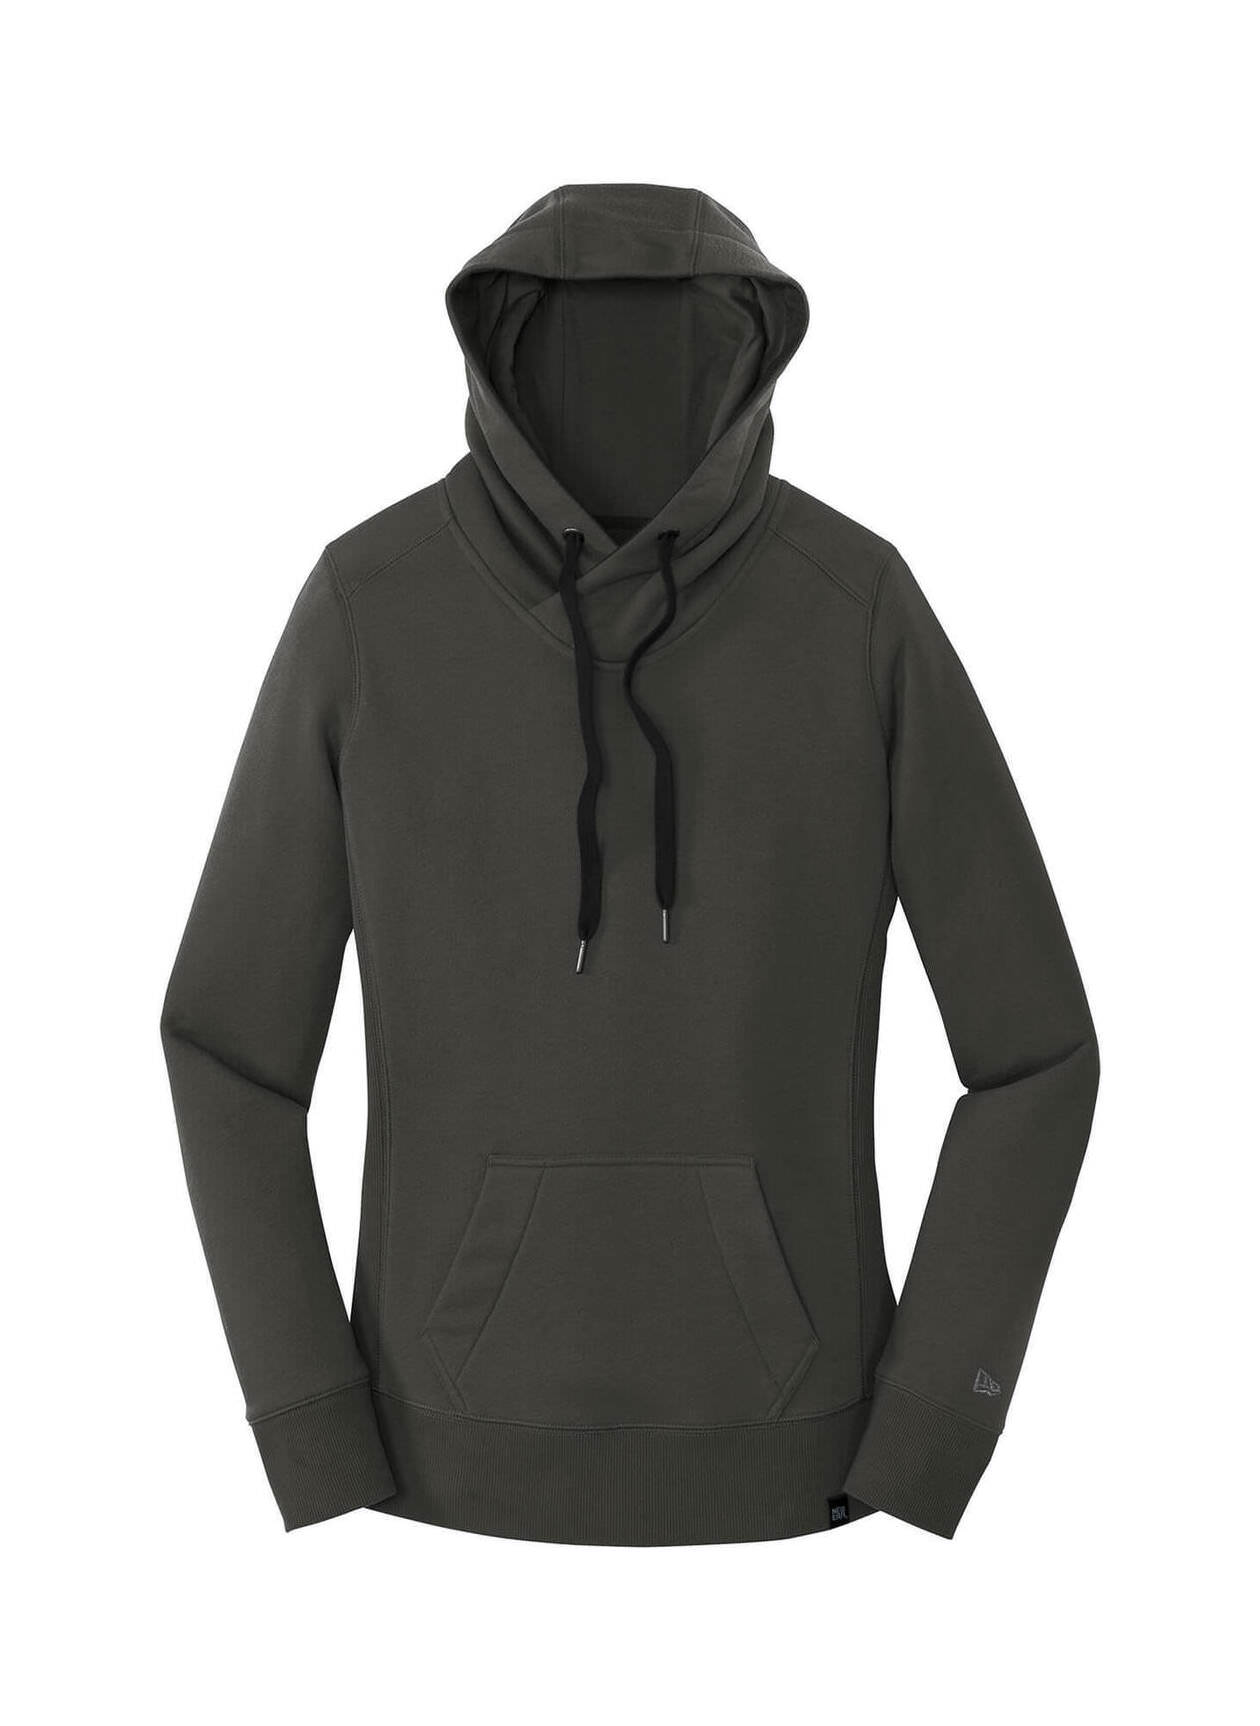 New Era Women's Graphite French Terry Pullover Hoodie